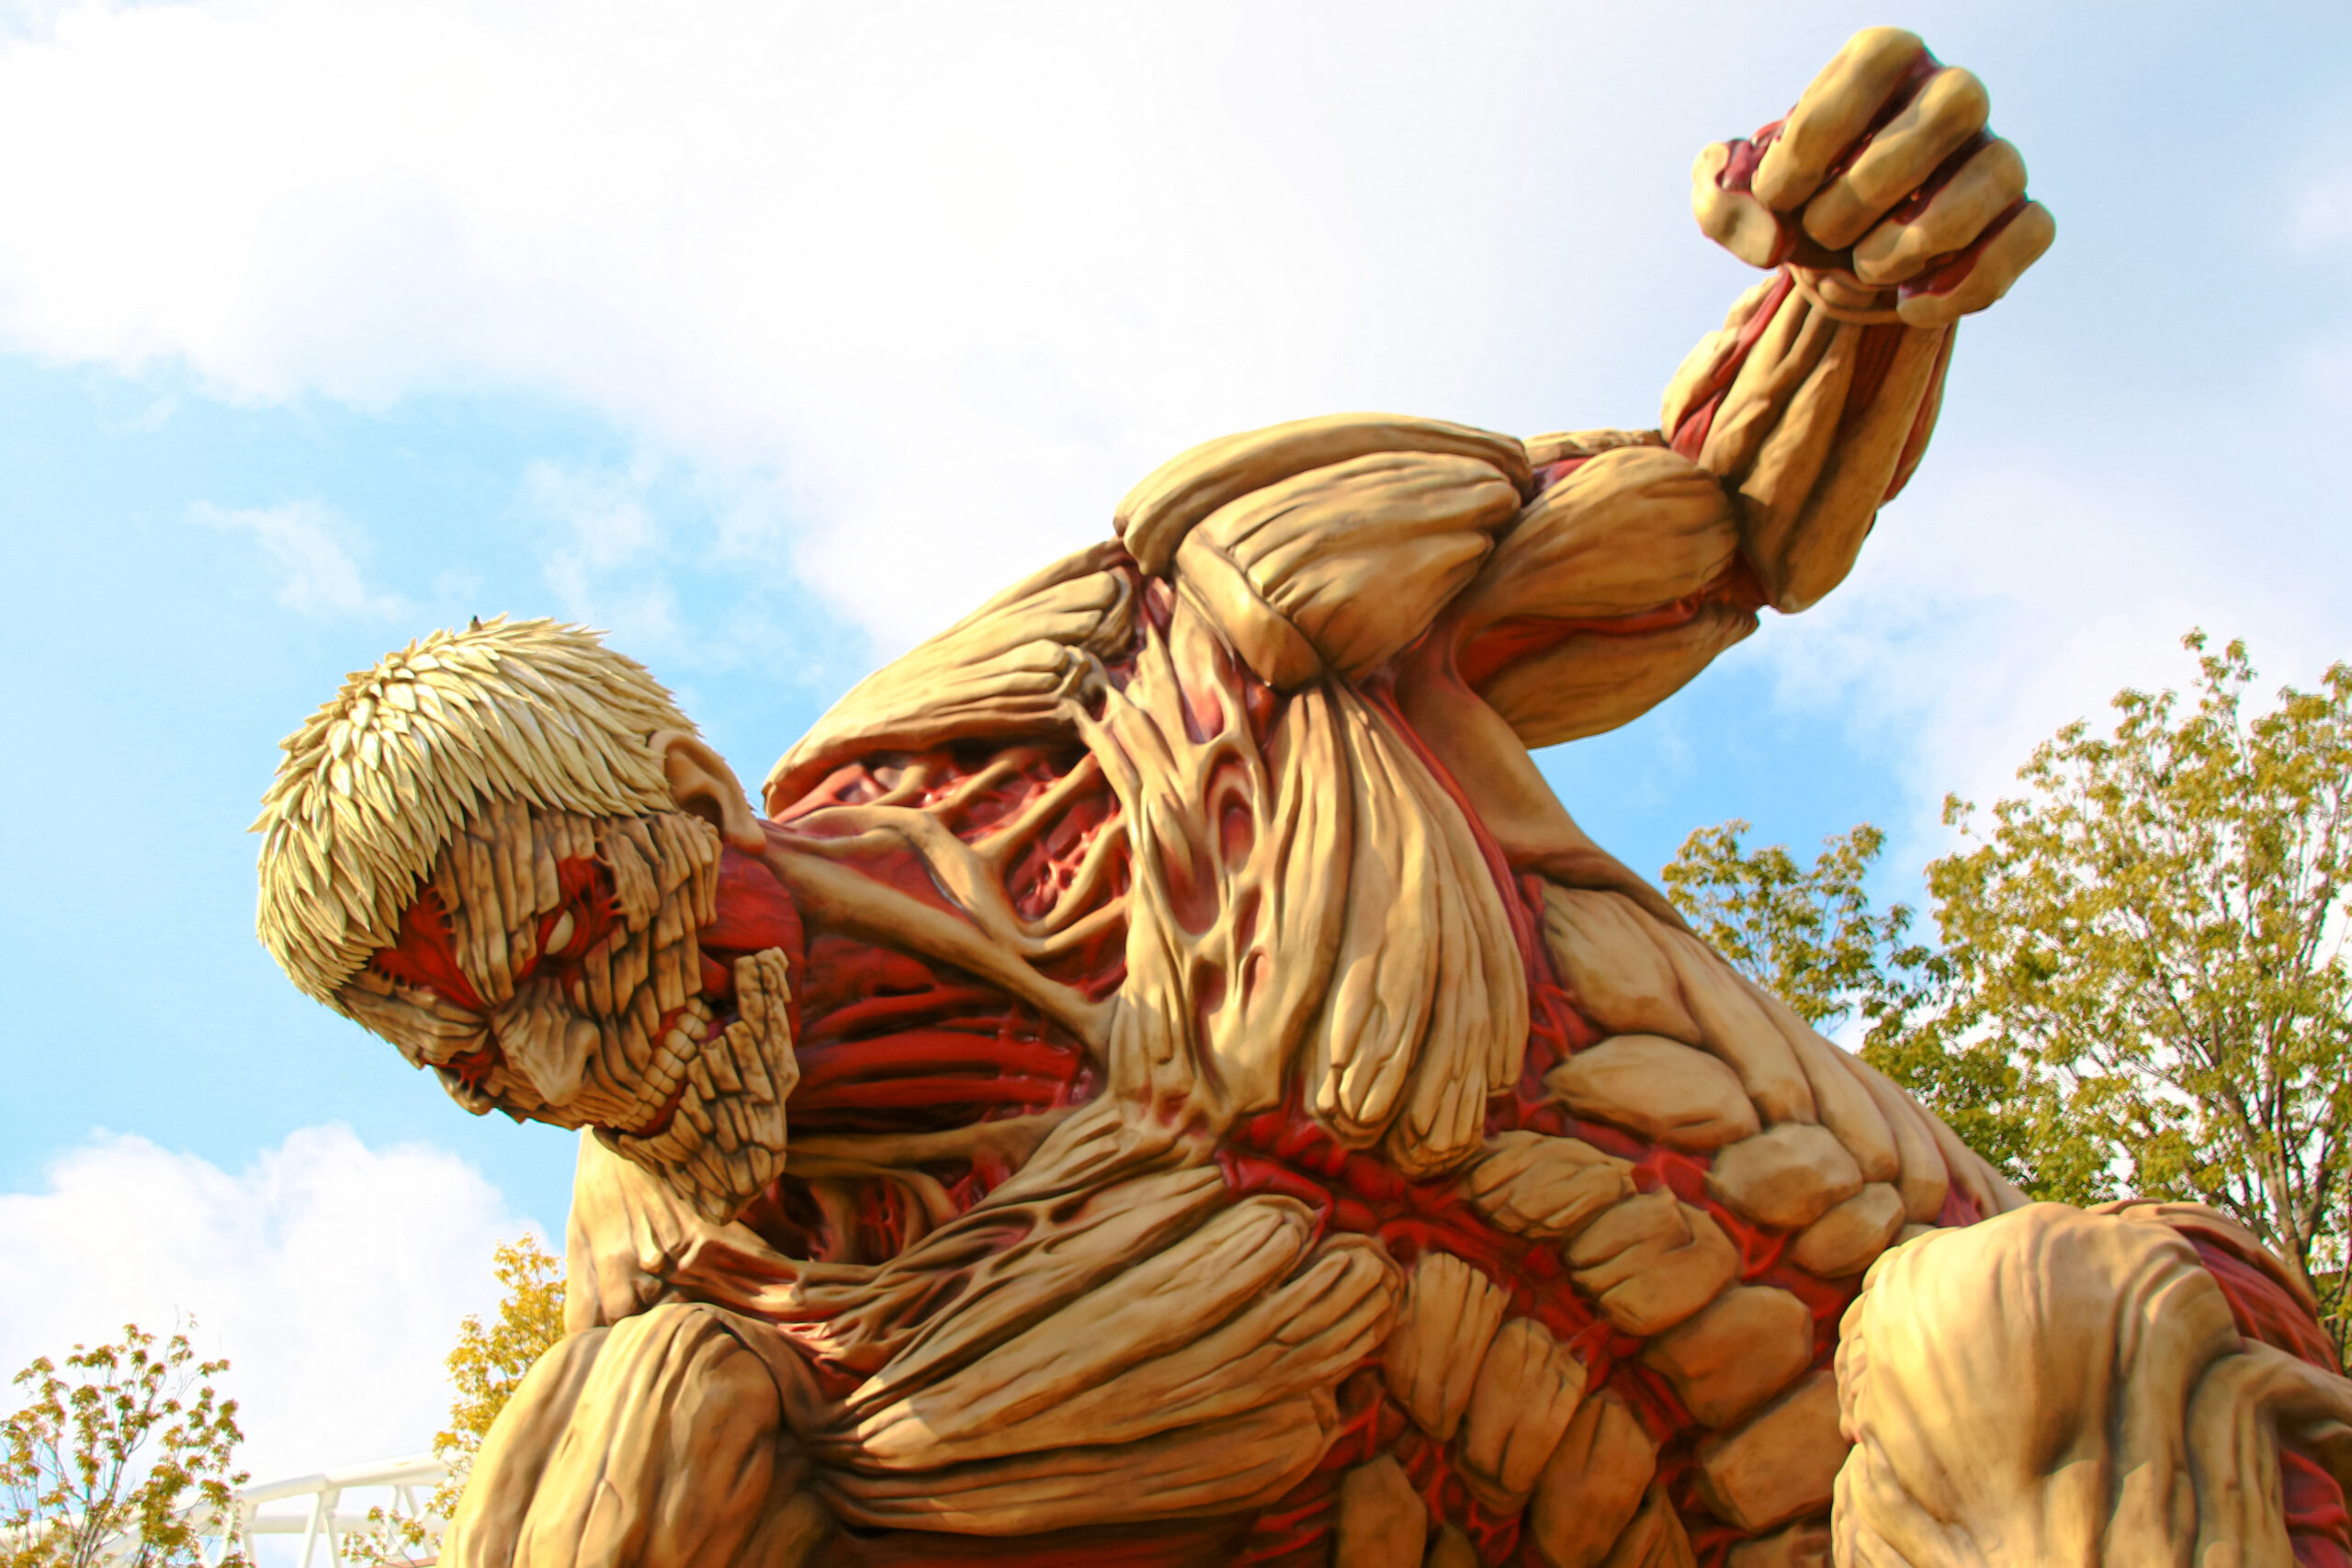 Attack on Titan Final Season Part 3 to Be Split Into Two Parts